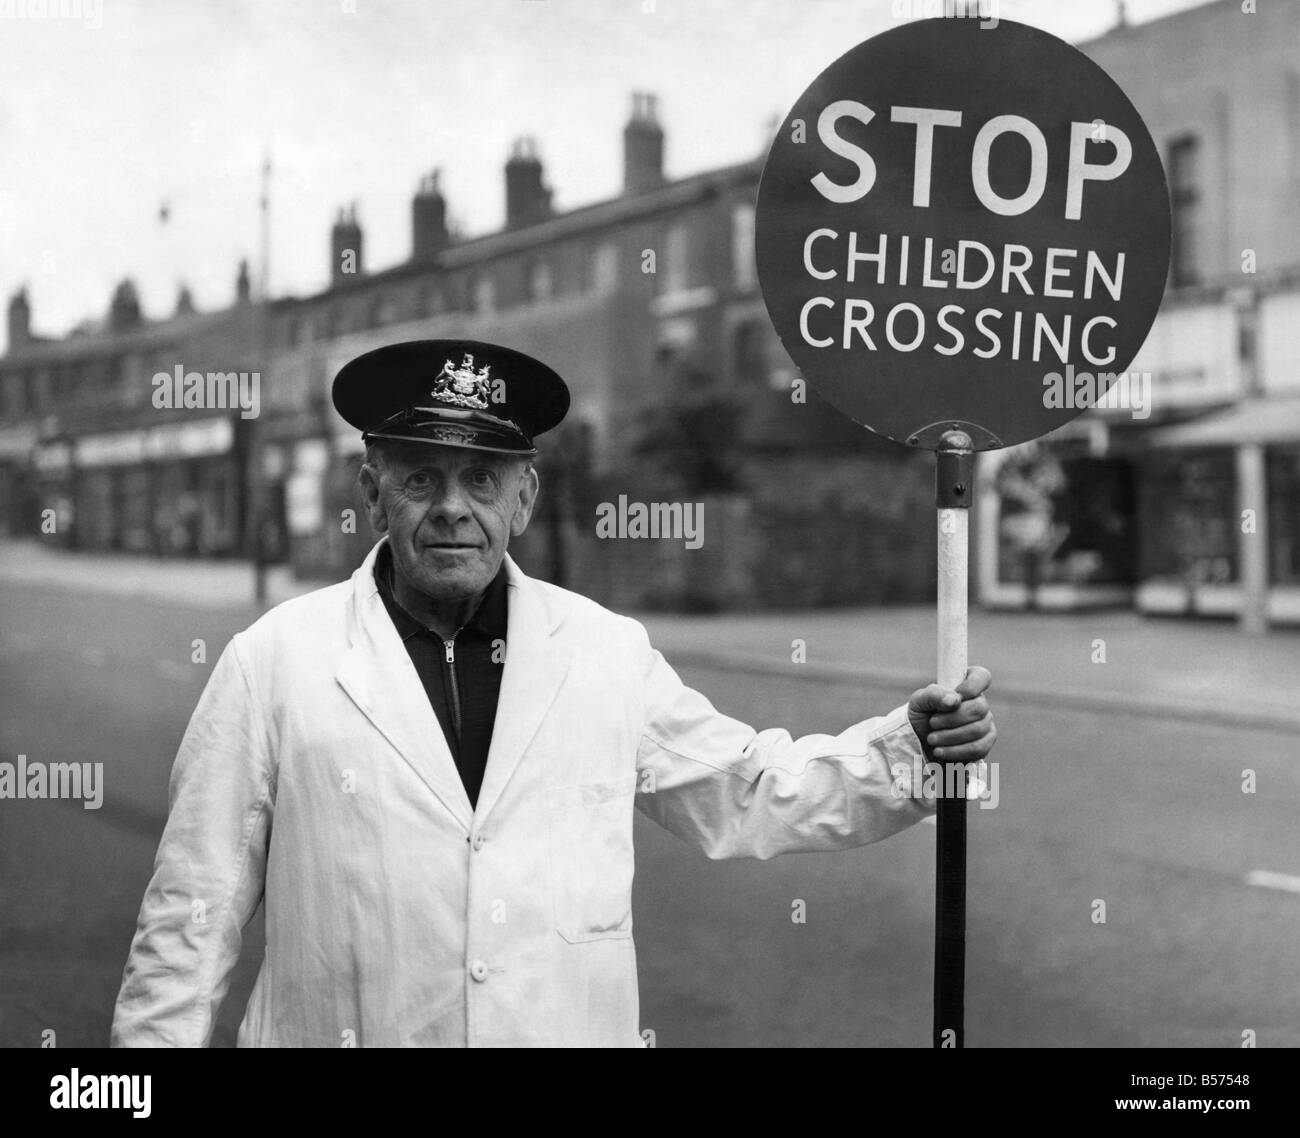 Mr. Harry Markley -69 of Orient Street, Cheetham Hill, Manchester, who is a traffic warden on Bury Old Road. September 1956 Stock Photo